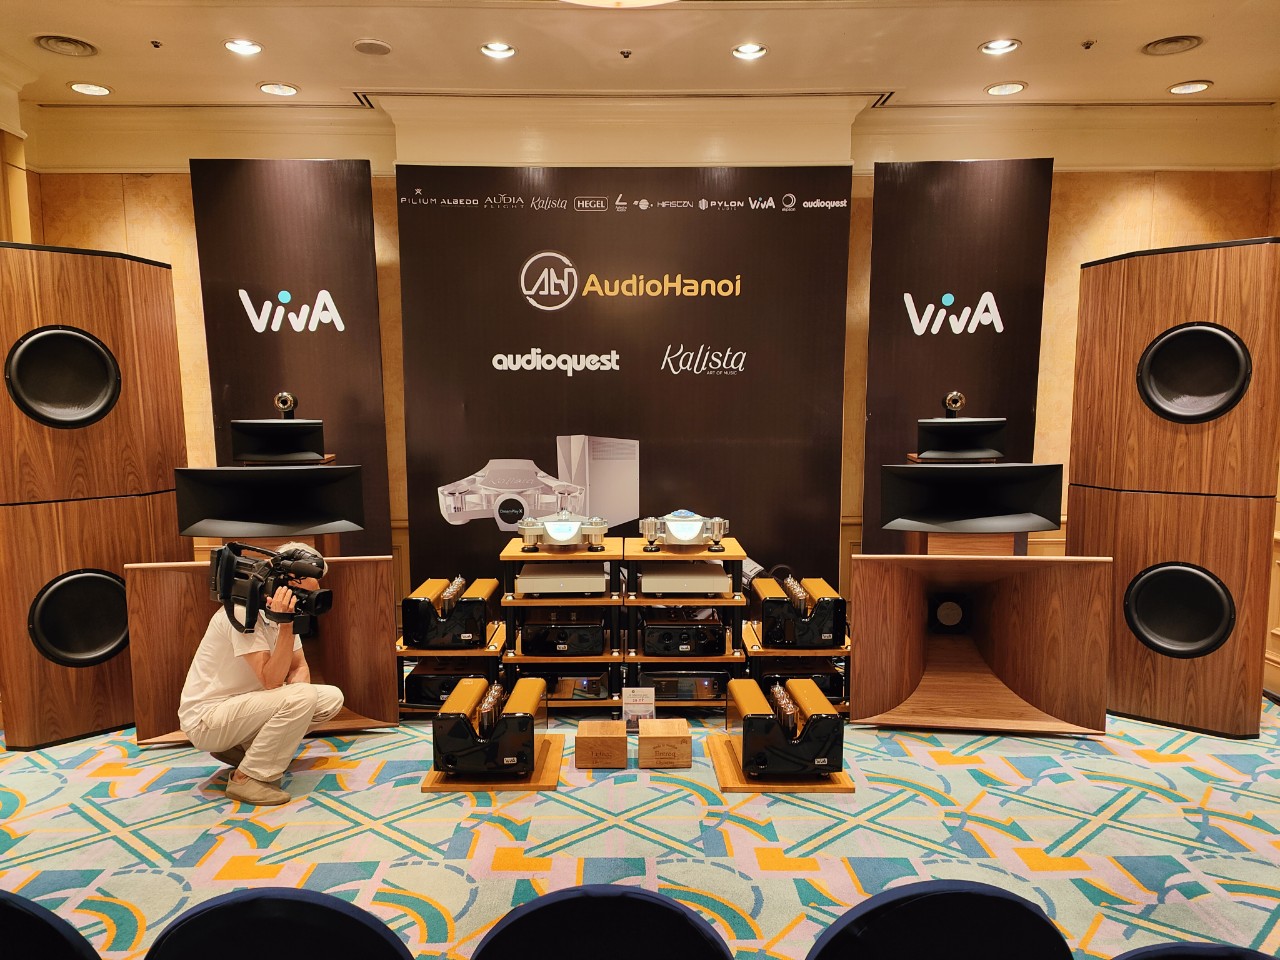 100 audio brands promoted at AVSHOW 2022 in Hanoi